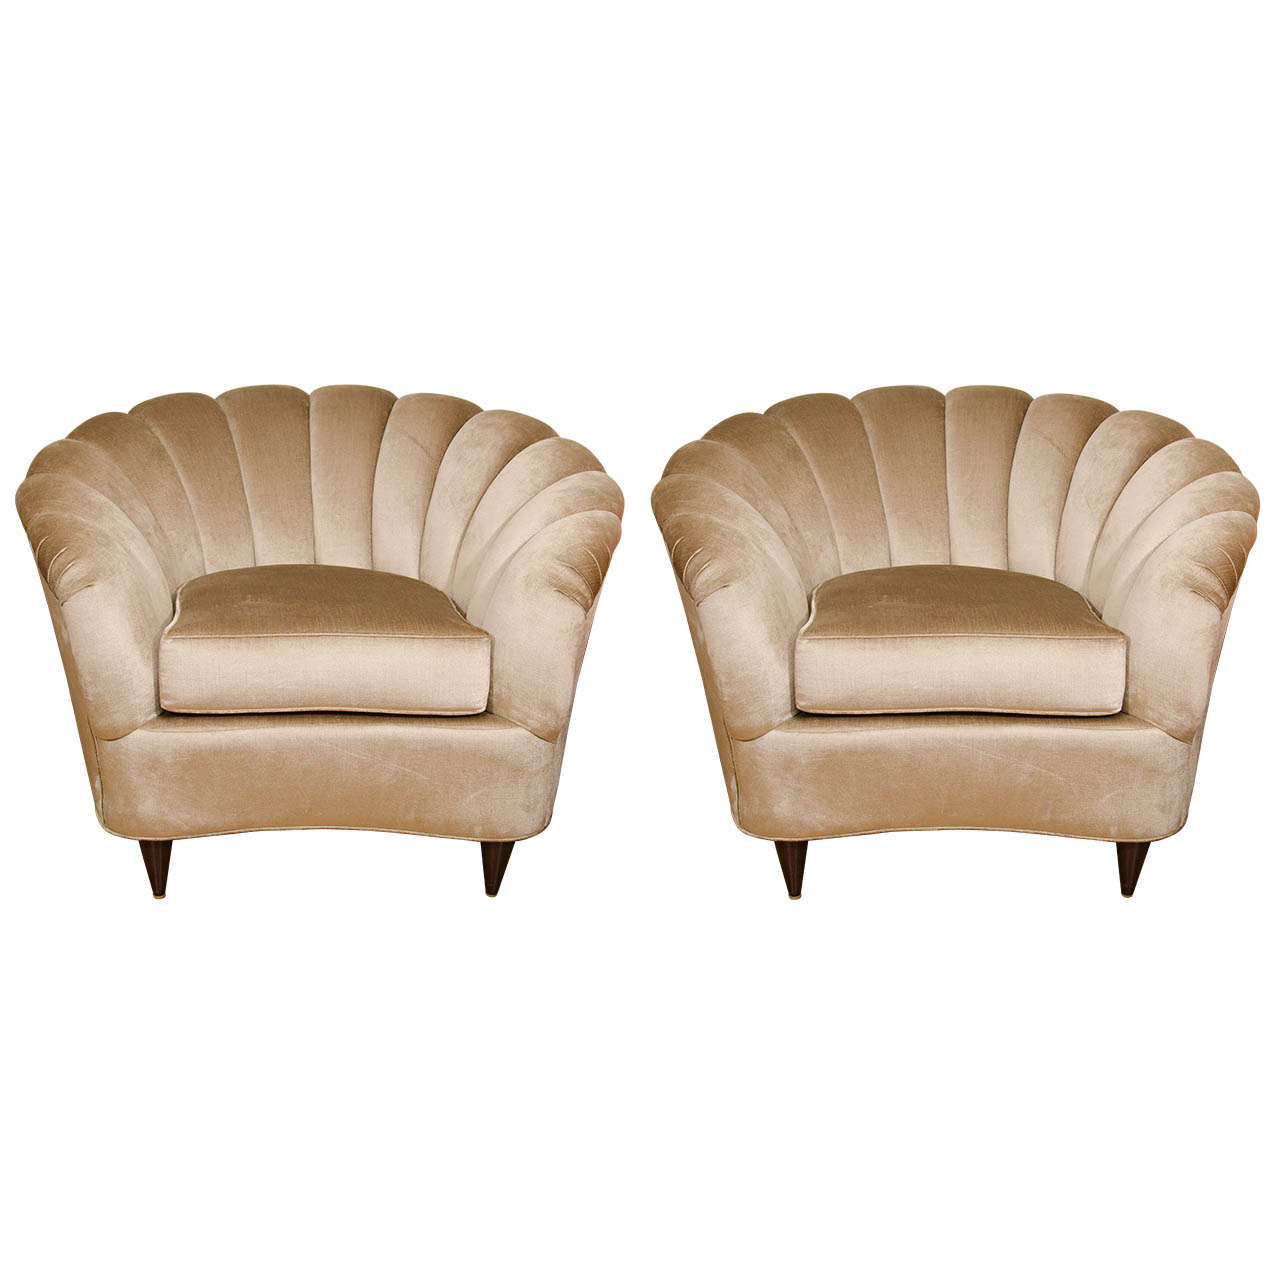 Pair Of Fan Back Upholstered Club Chairs